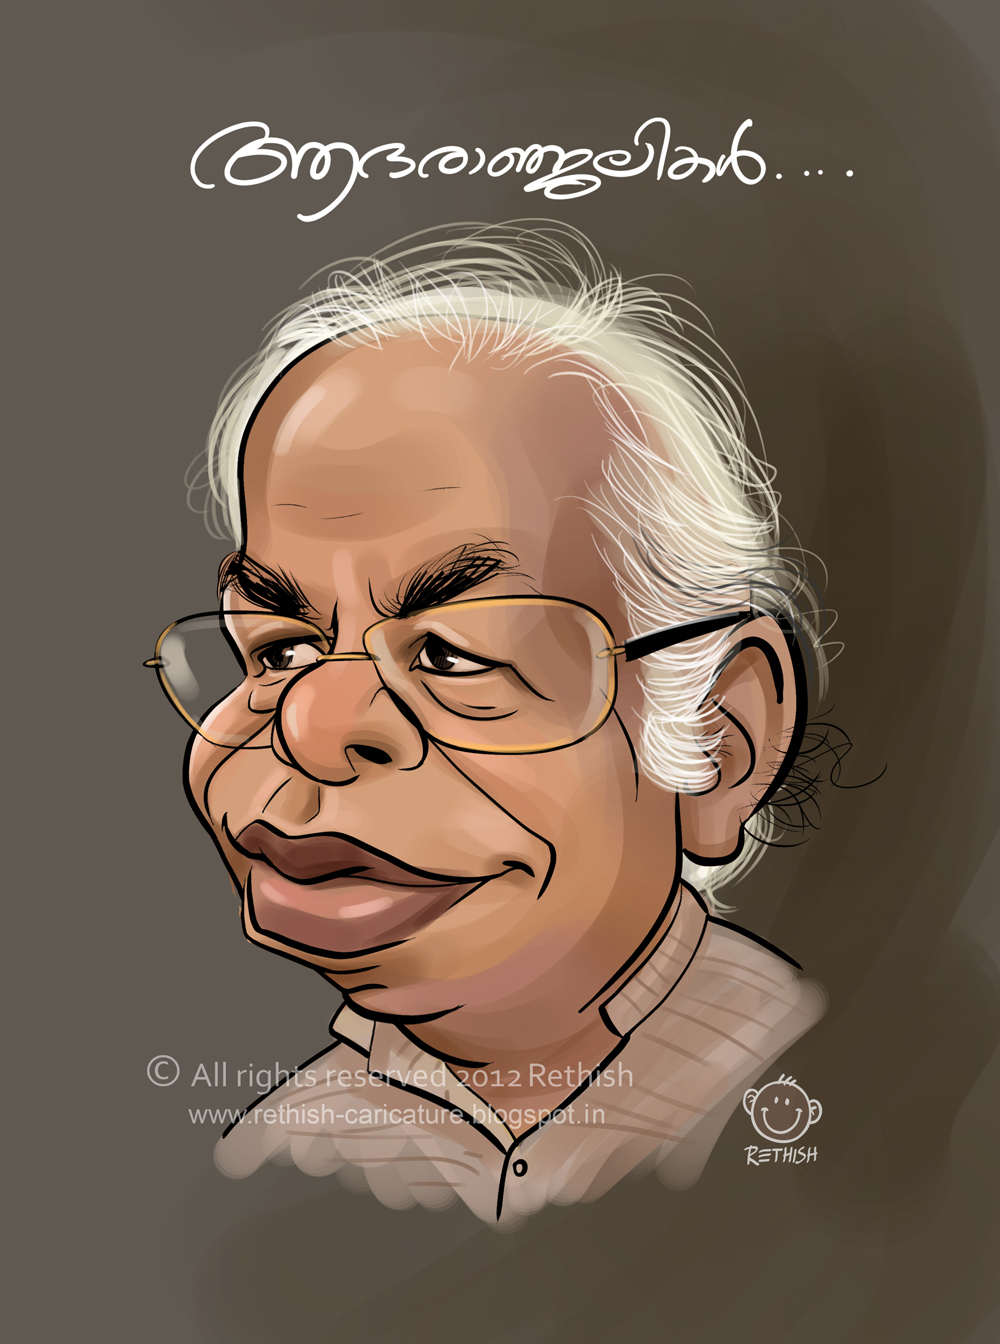 Tribute to great malayalam film actor THILAKAN